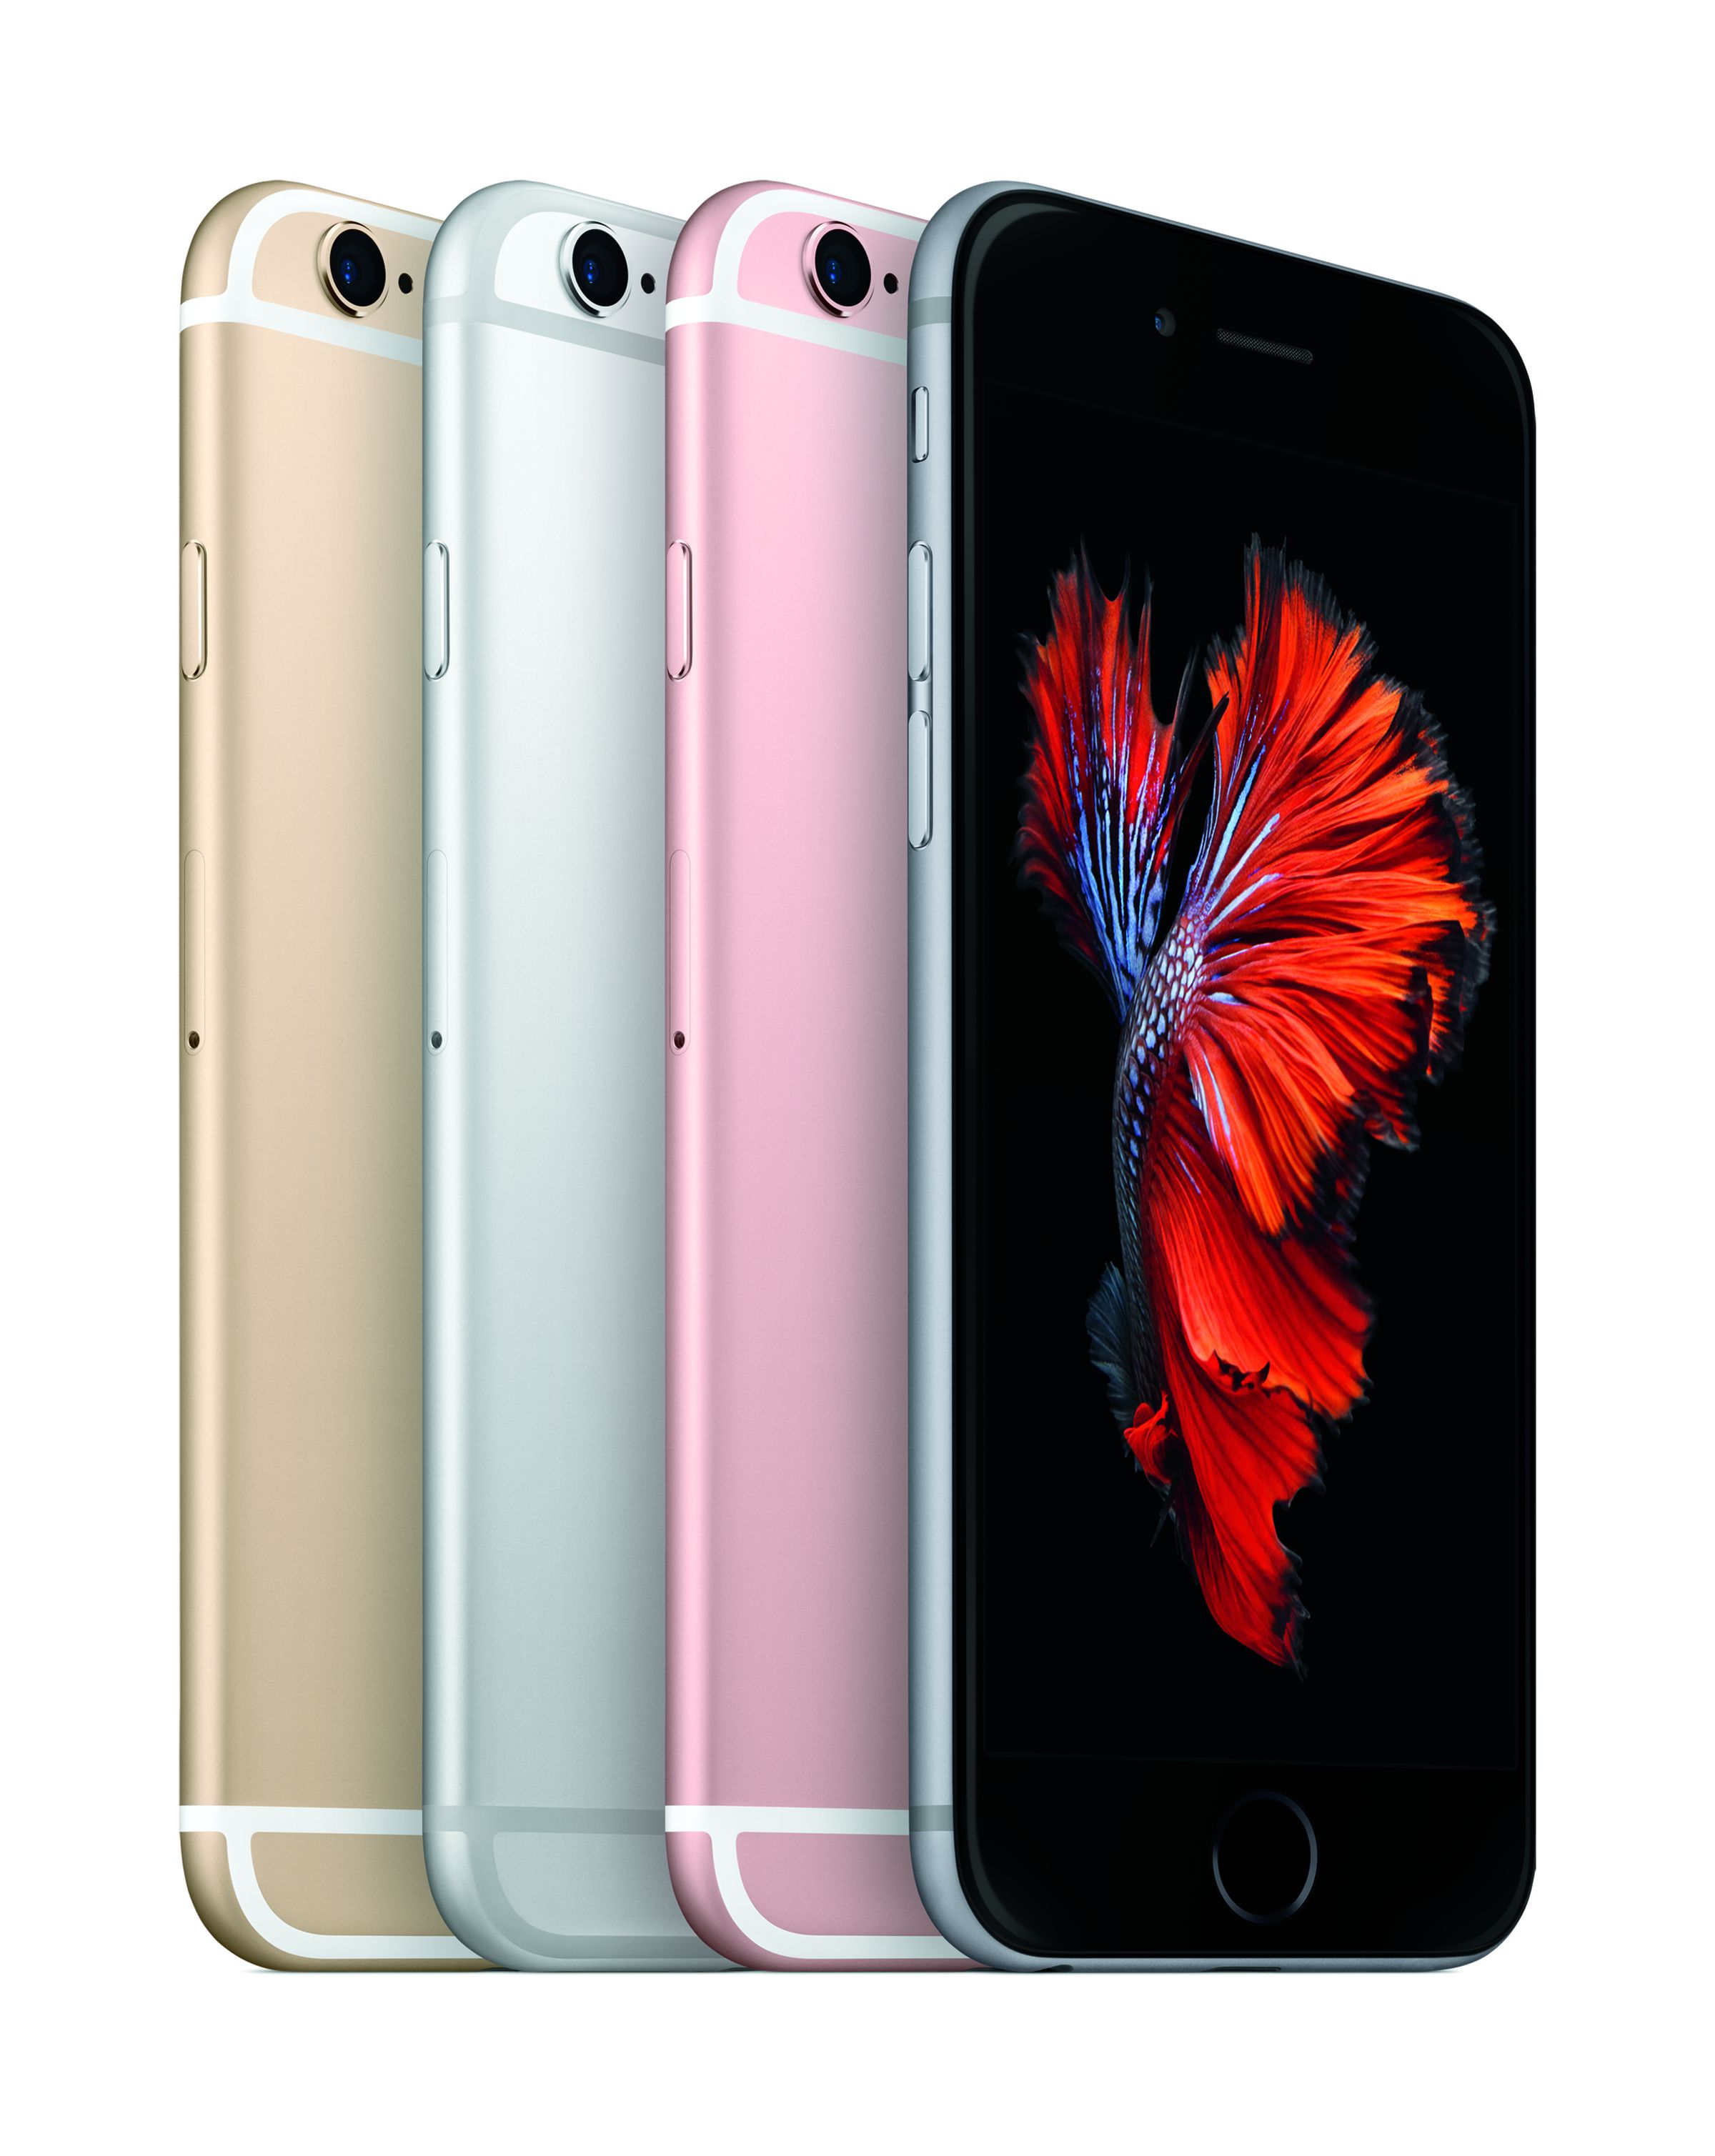 iPhone 6S and 6S Plus press photos